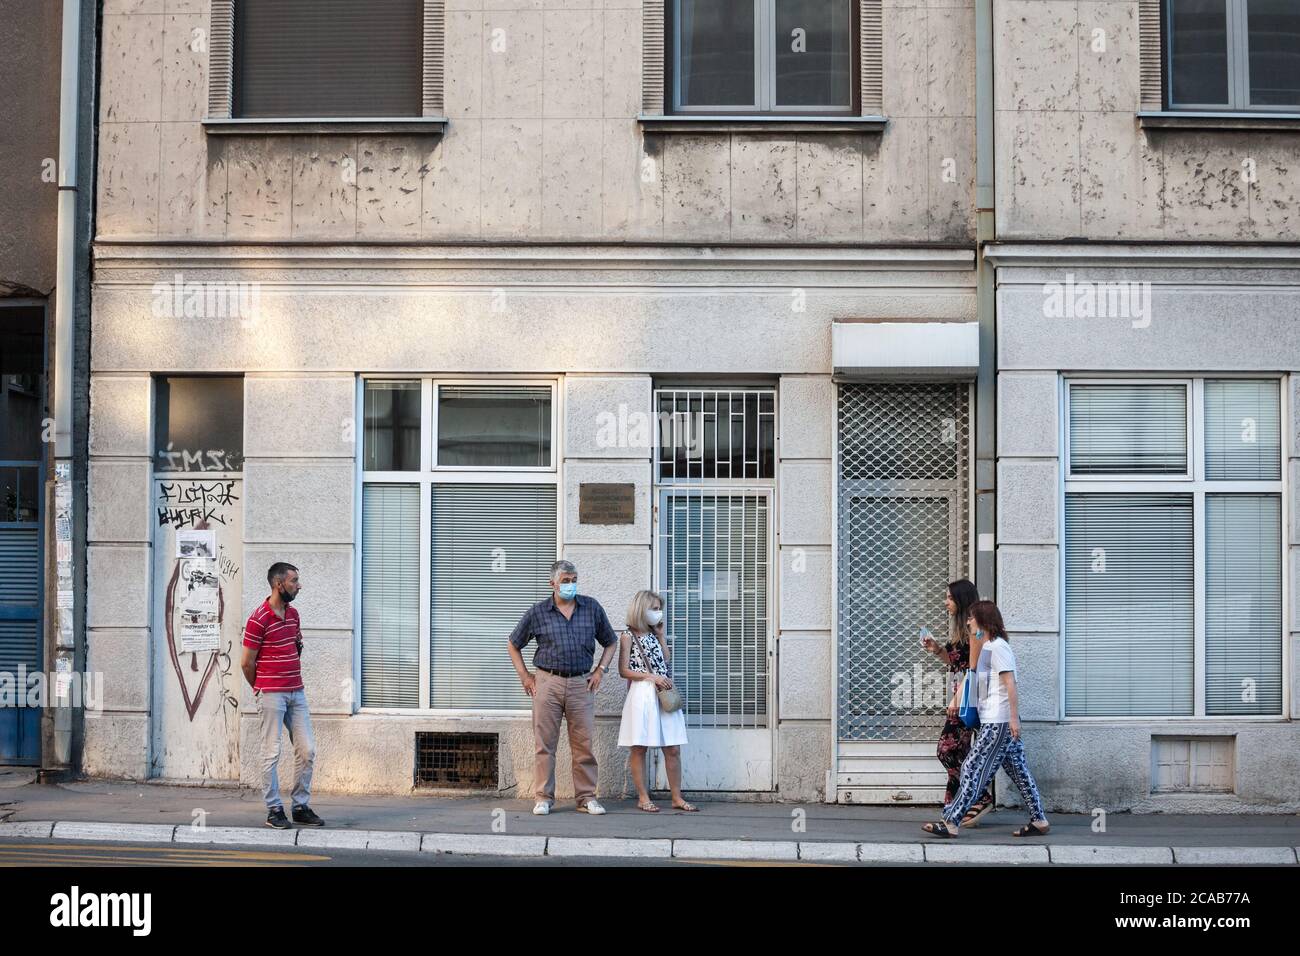 BELGRADE, SERBIA - JULY 21, 2020: Four persons, young and old, men and women, waiting to enter a shop on a boulevard of Belgrade wearing face mask pro Stock Photo